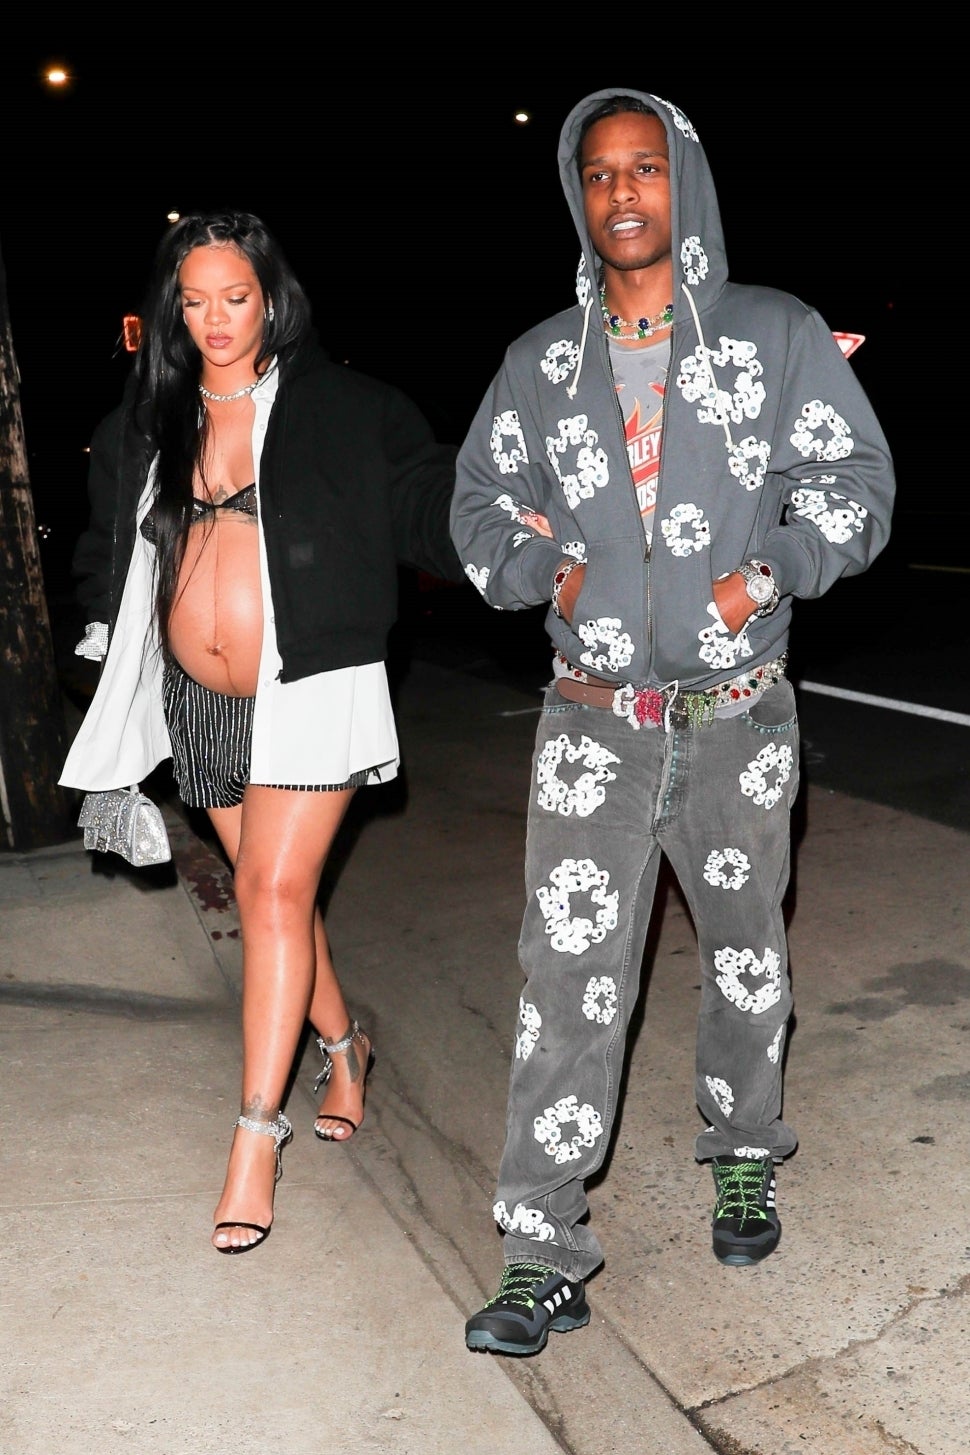 Rihanna and A$AP Rocky step out for dinner following rapper's arrest